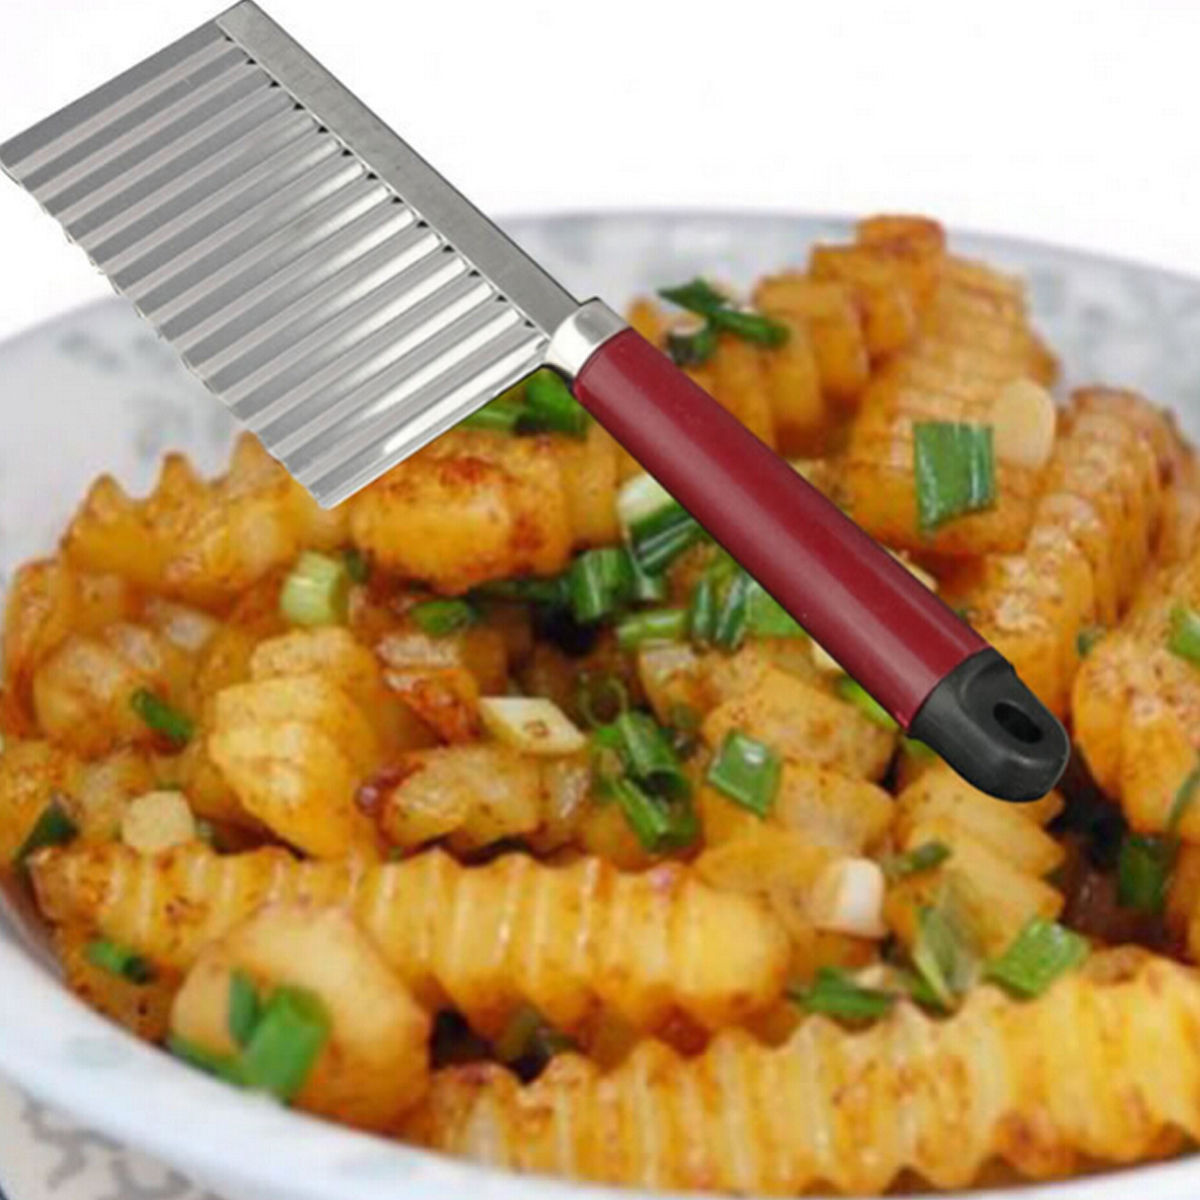 Image of New Stainless Steel Potato Chip Dough Vegetable Crinkle Wavy Slicer Knife Food Quality Plastic Handle